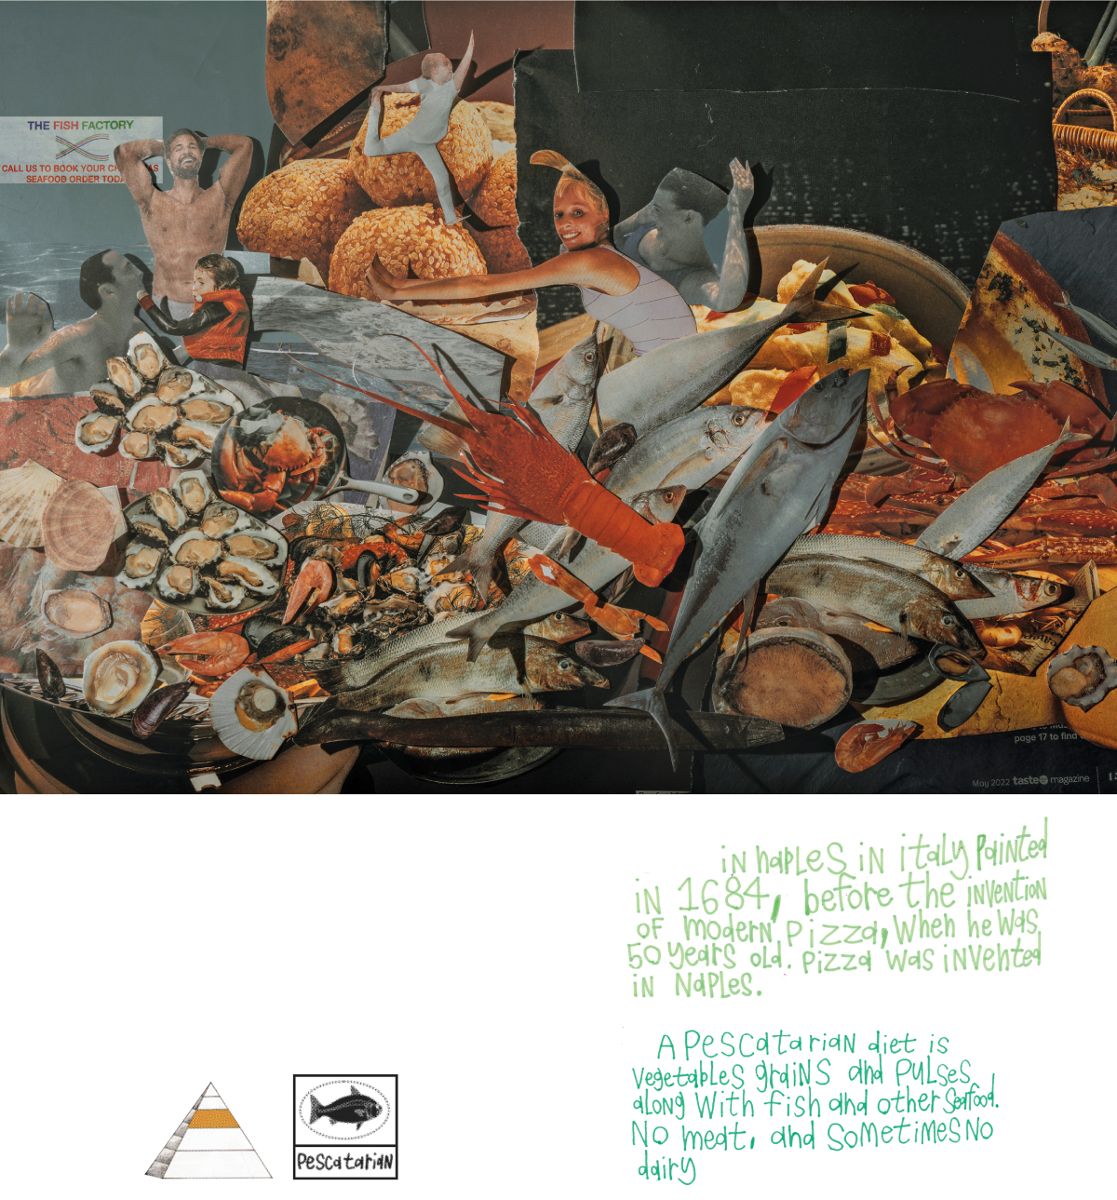 A collage of image and handwritten text. The image is a paper collage featuring a bounty of seafood and people doing exercise. The text below describes a pescatarian diet. 